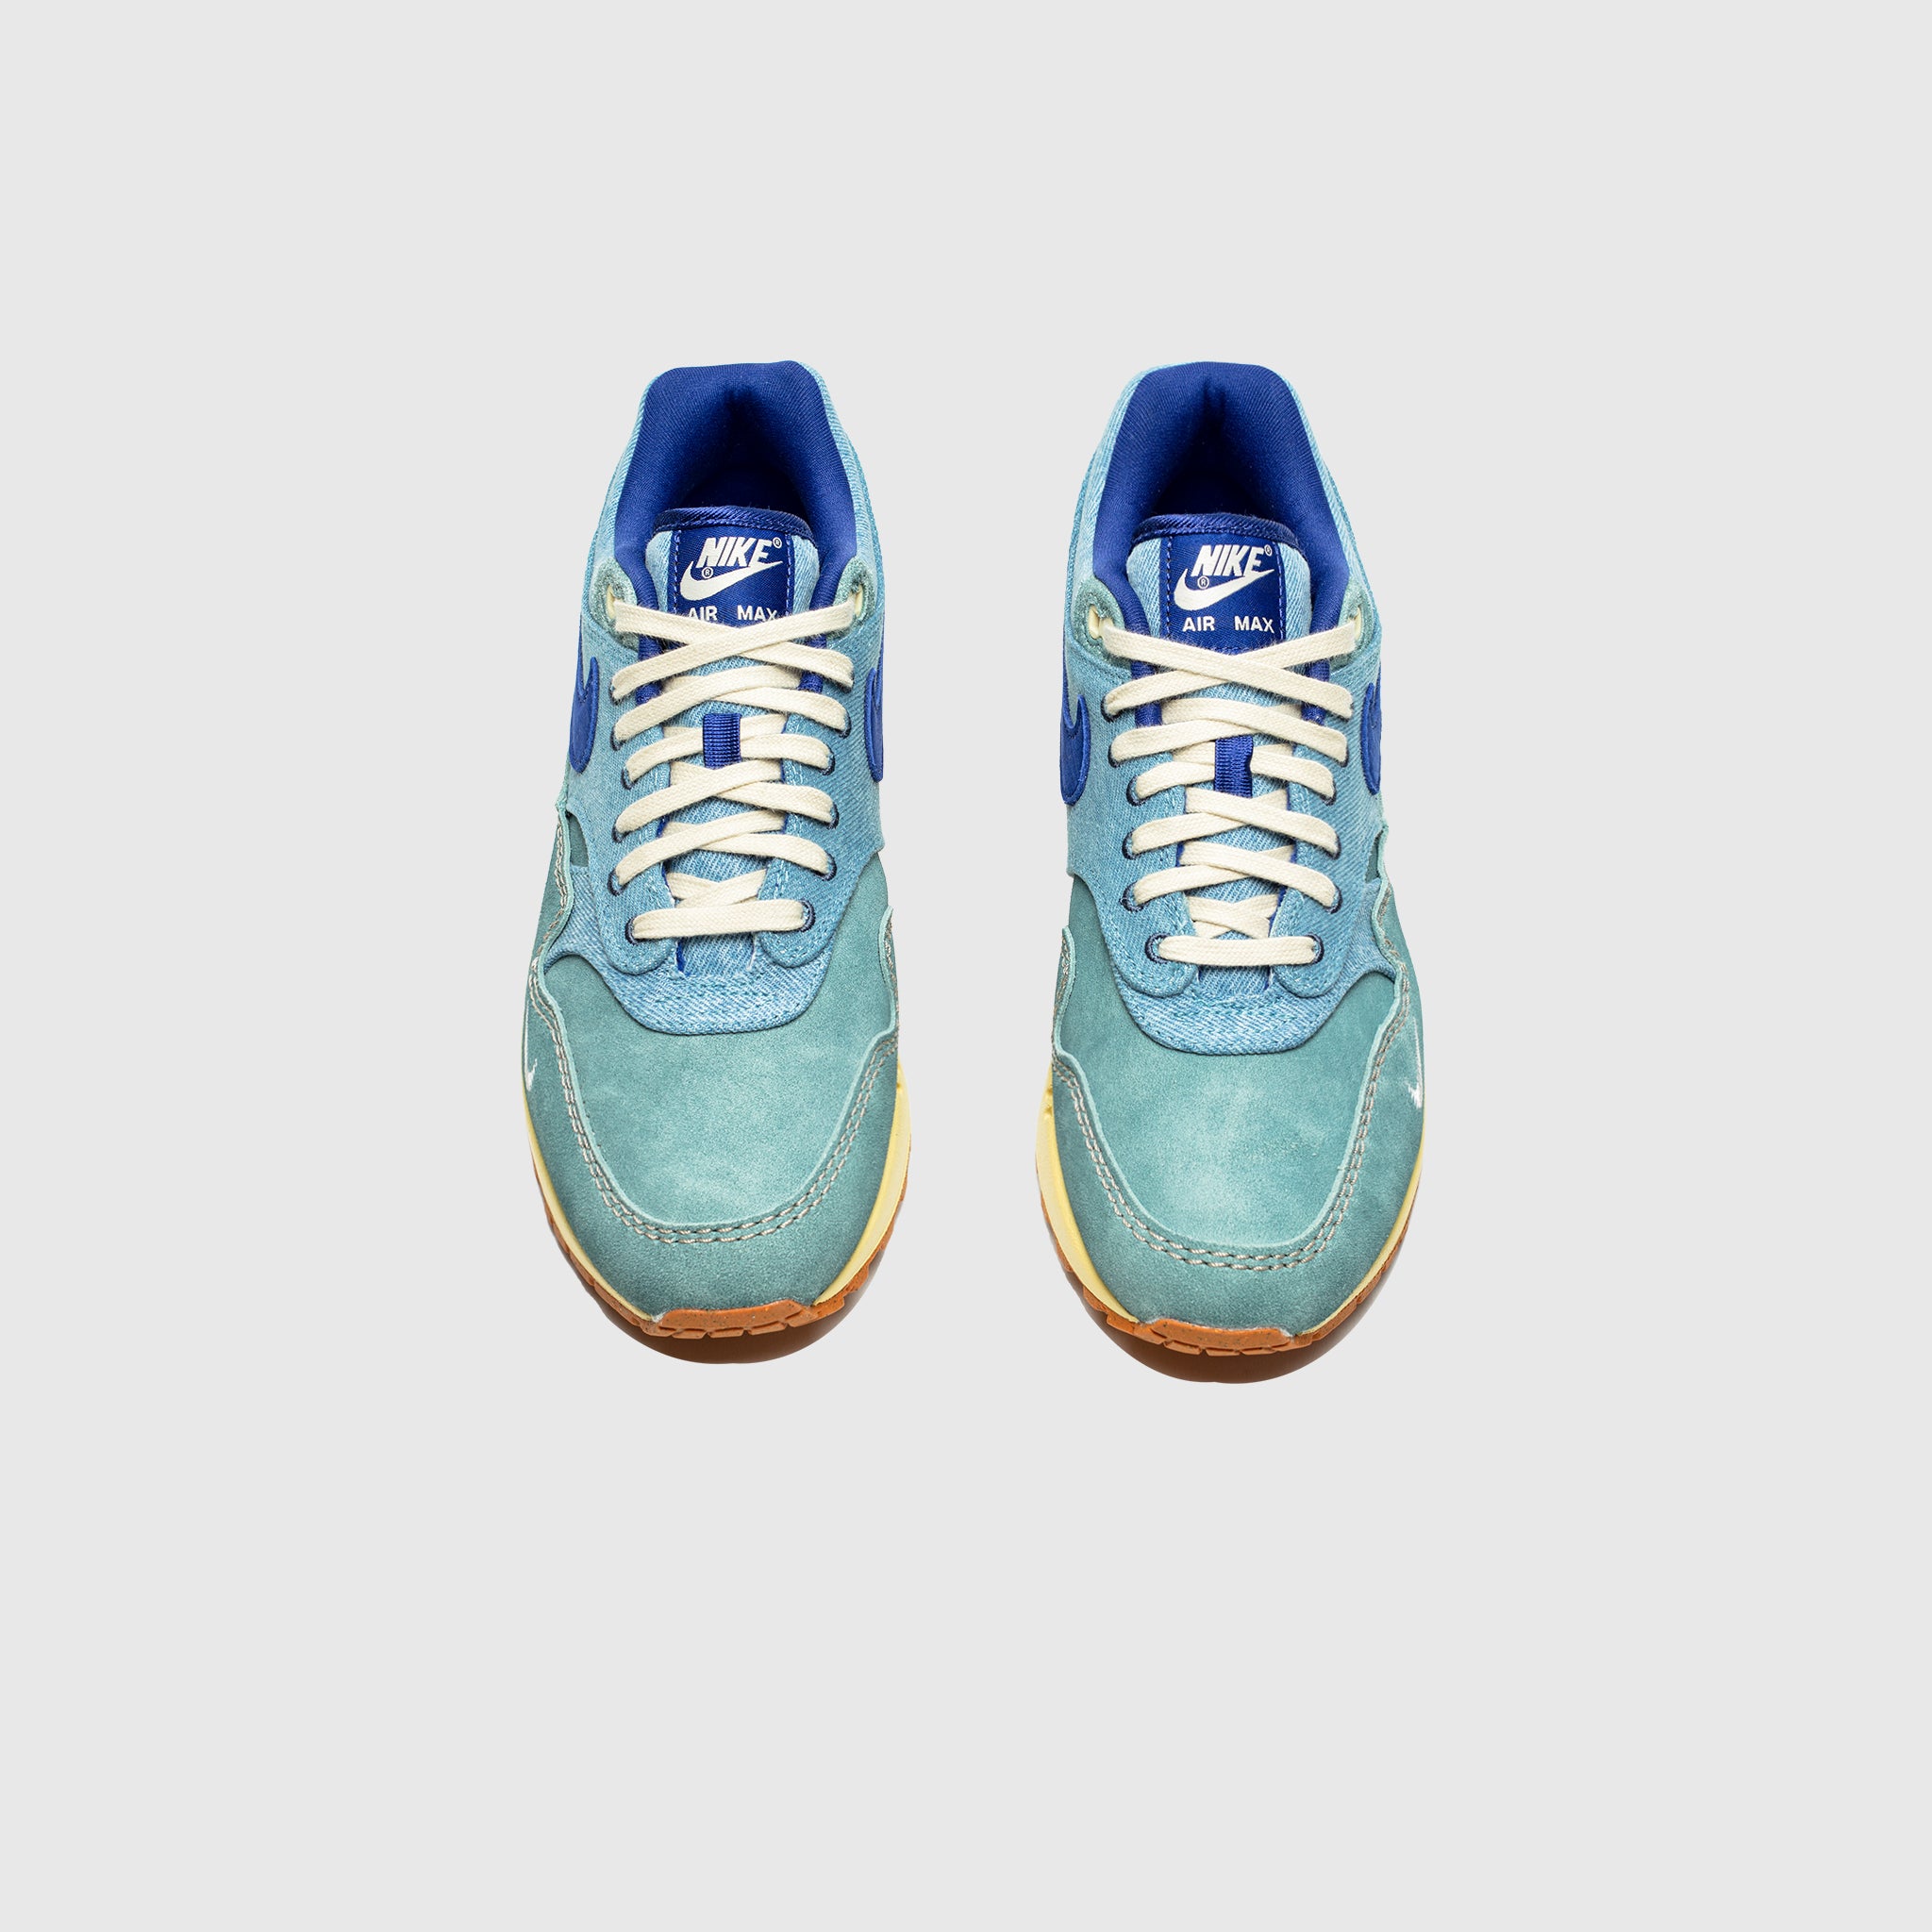 Nike Air Max 1 PRM Sneakers in Blue in Slate/Blue/Lemon Wash, Size UK 5.5 | End Clothing